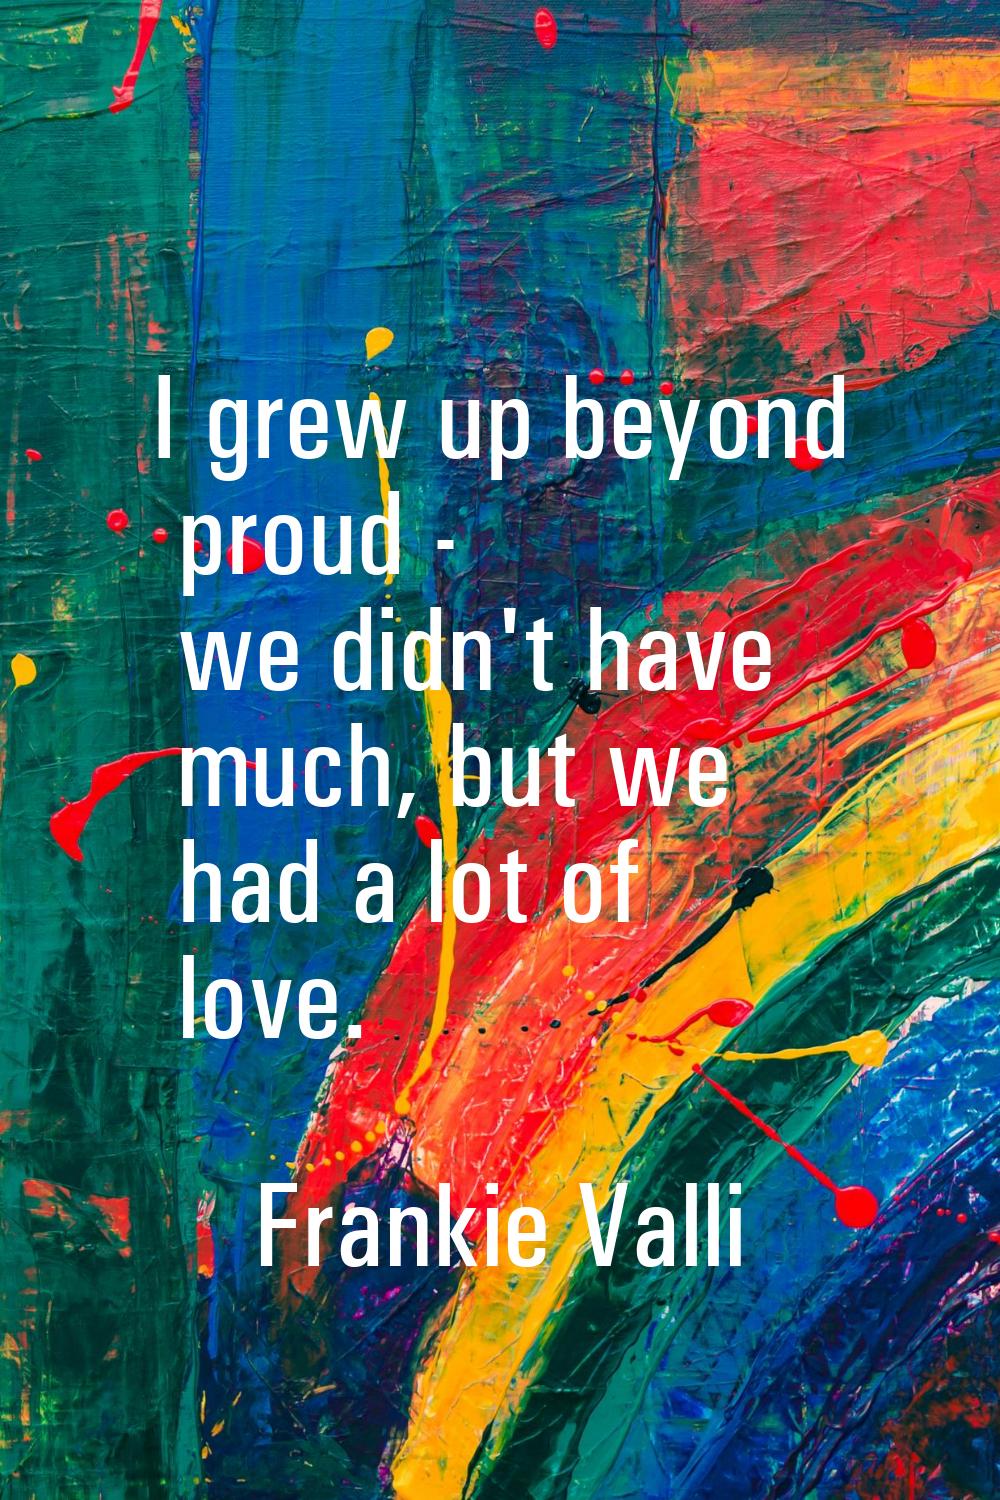 I grew up beyond proud - we didn't have much, but we had a lot of love.